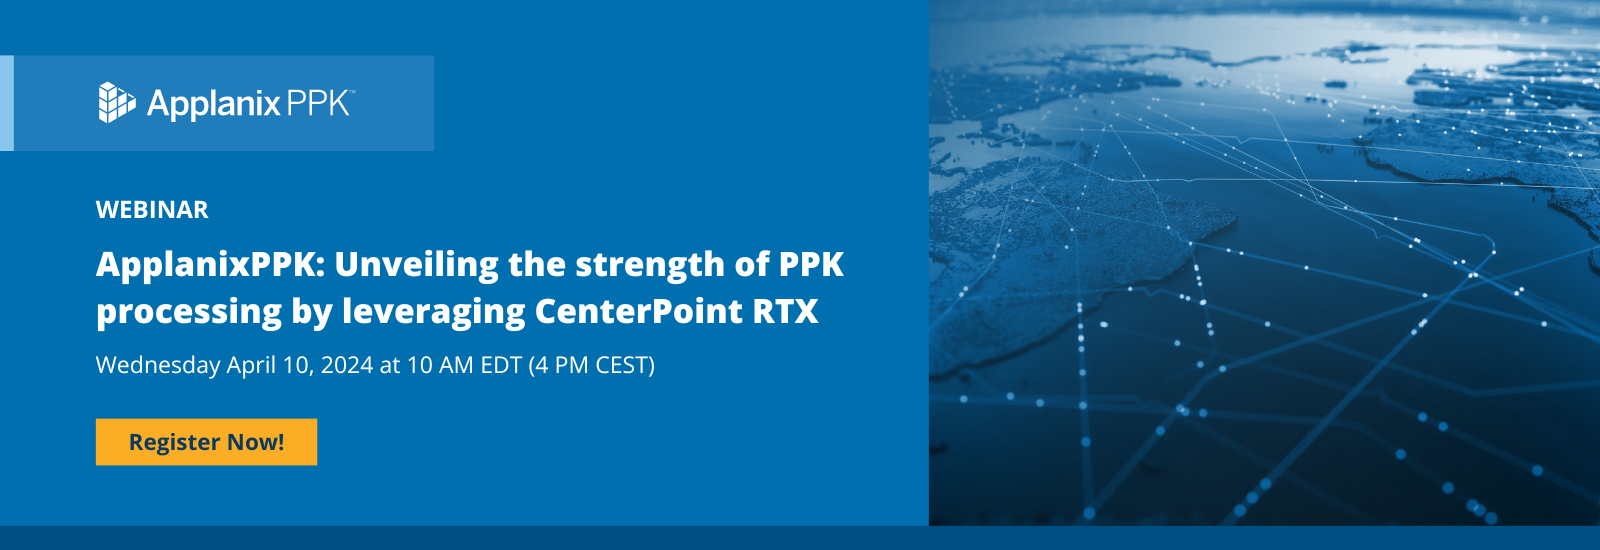 Join us for a webinar on ApplanixPPK: Unveiling the strength of PPK processing by leveraging CenterPoint RTX! | Wednesday April 10, 2024 at 10 AM EDT (4 PM CEST) | Register Now!!